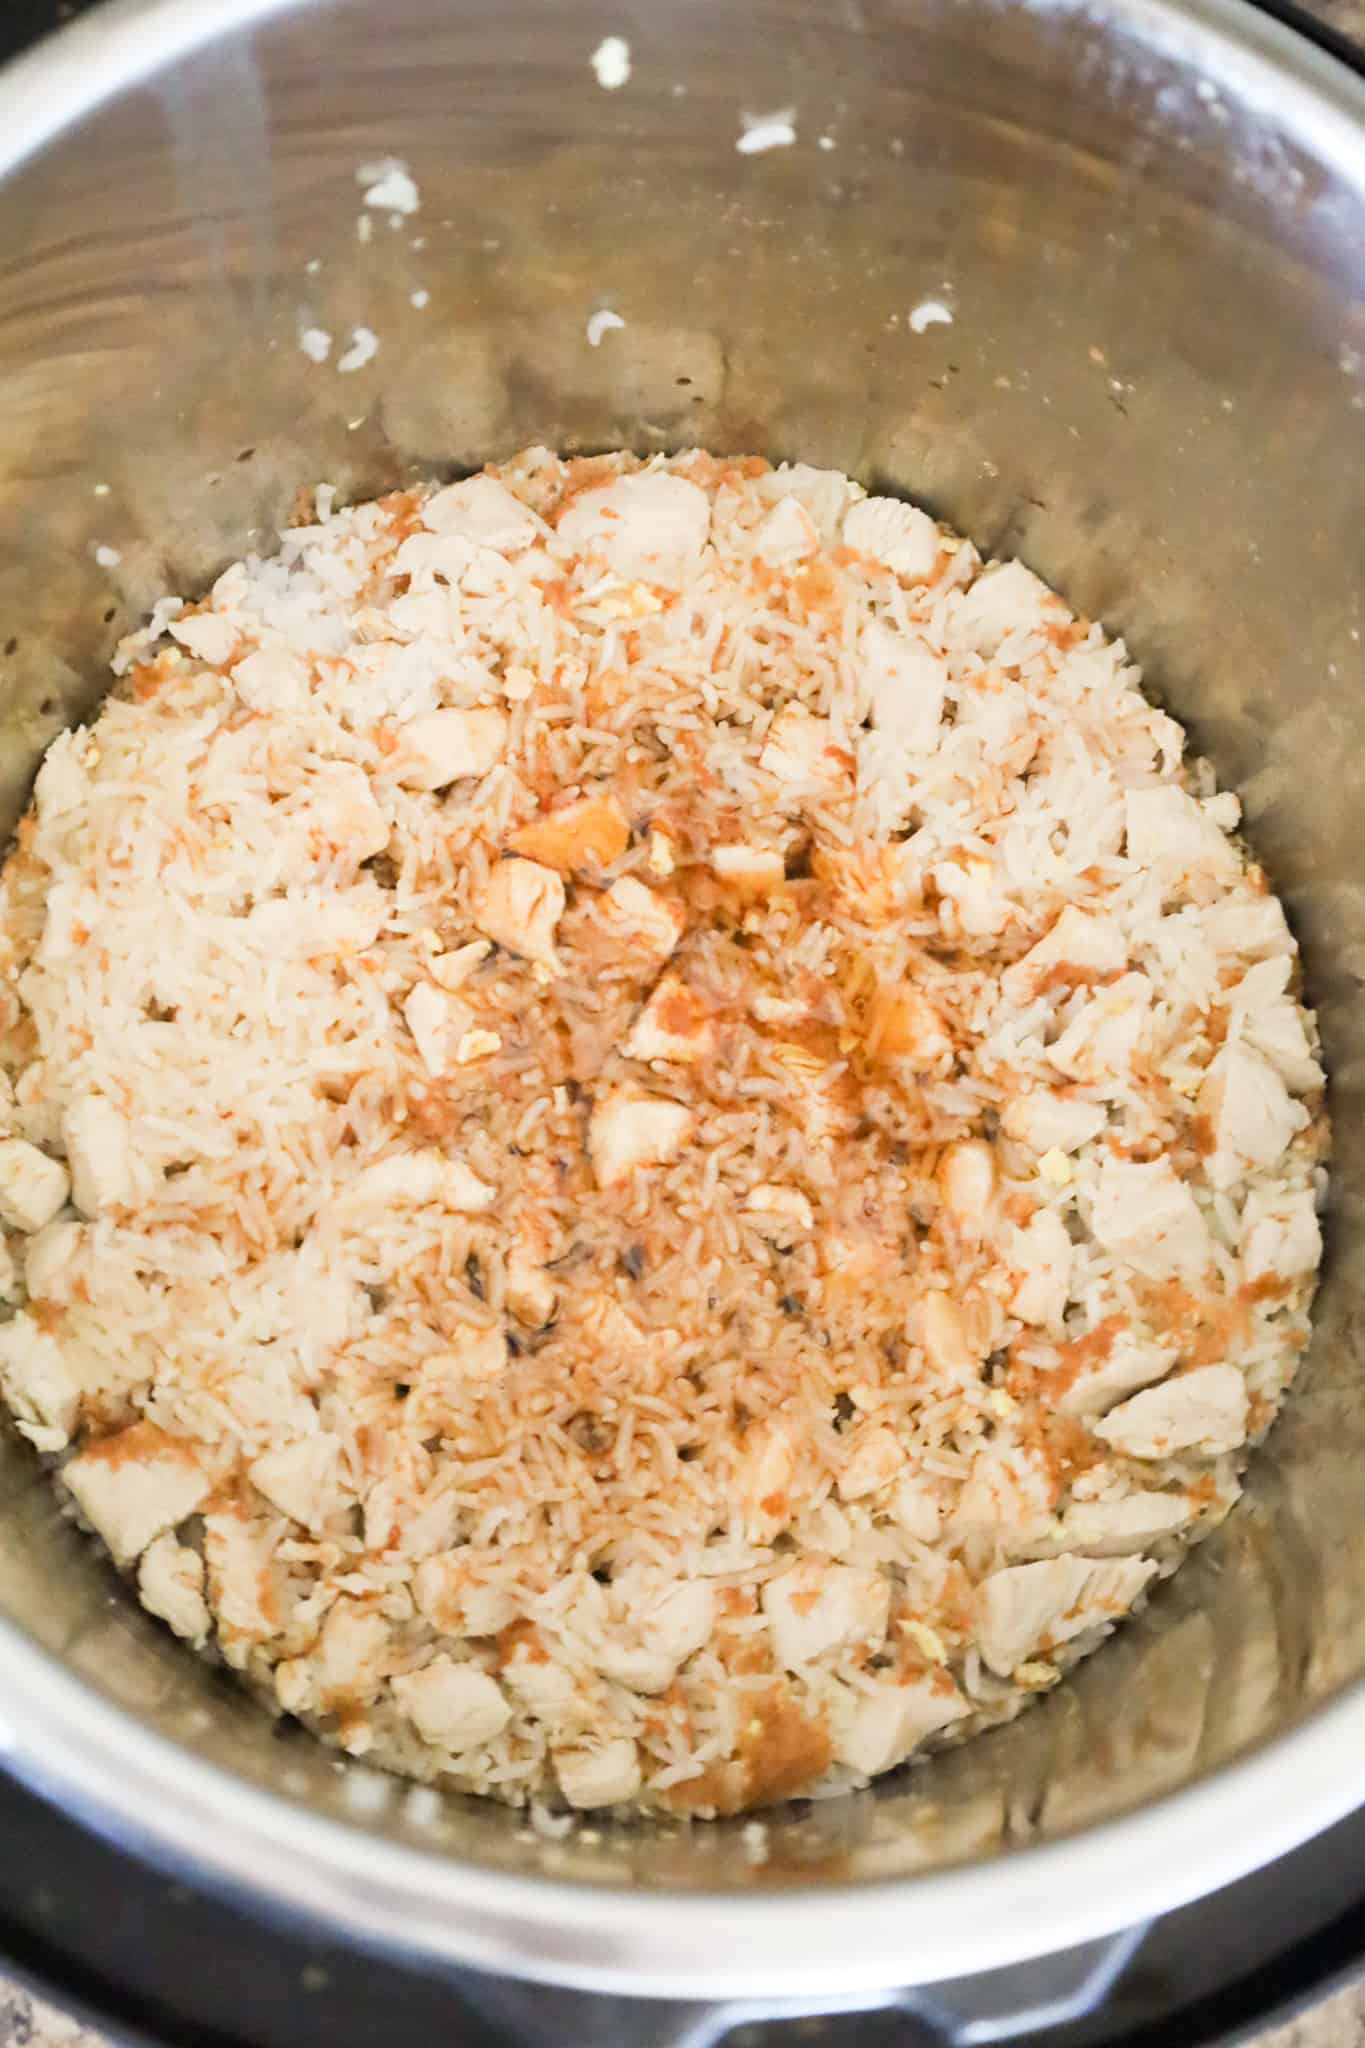 soy sauce and toasted sesame oil added to cooked chicken and rice in an Instant Pot